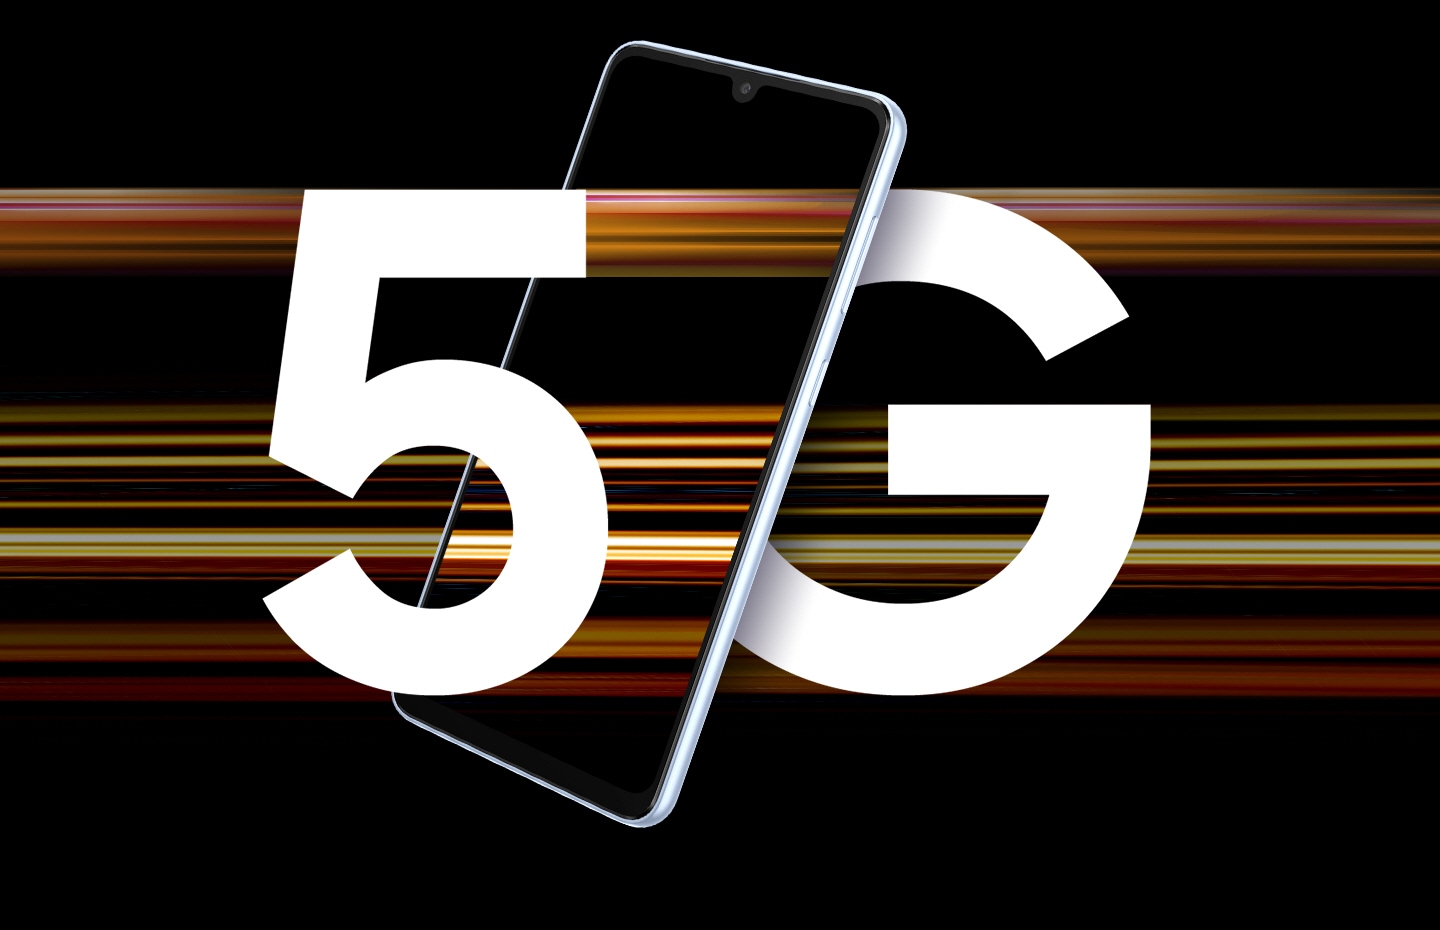 5G. We’re already connected